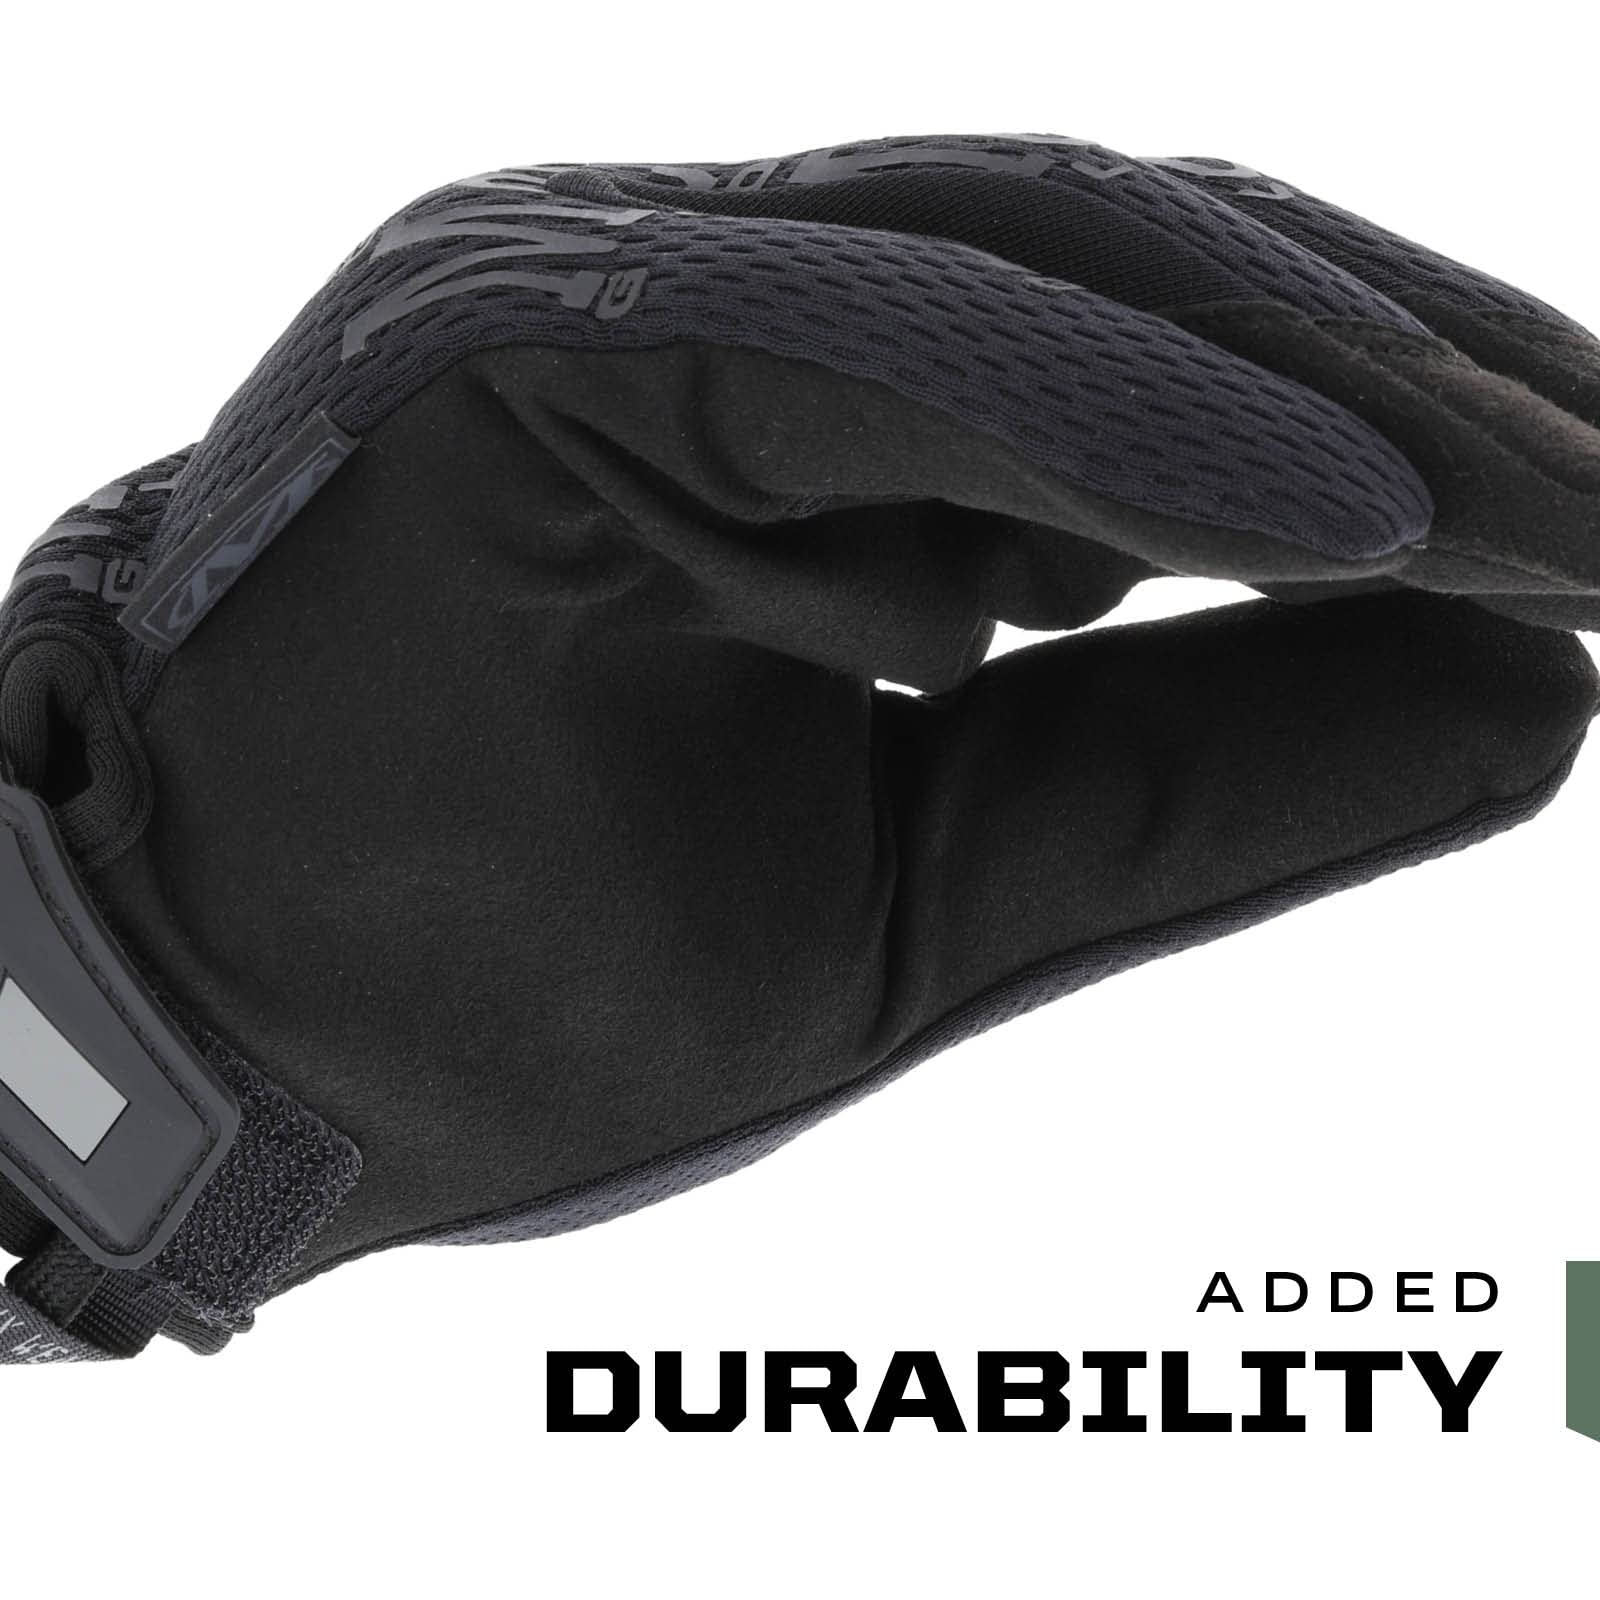 Mechanix Wear: The Original Covert Tactical Work Gloves with Secure Fit, Flexible Grip for Multi-Purpose Use, Durable Touchscreen Safety Gloves for Men (Black, Medium)